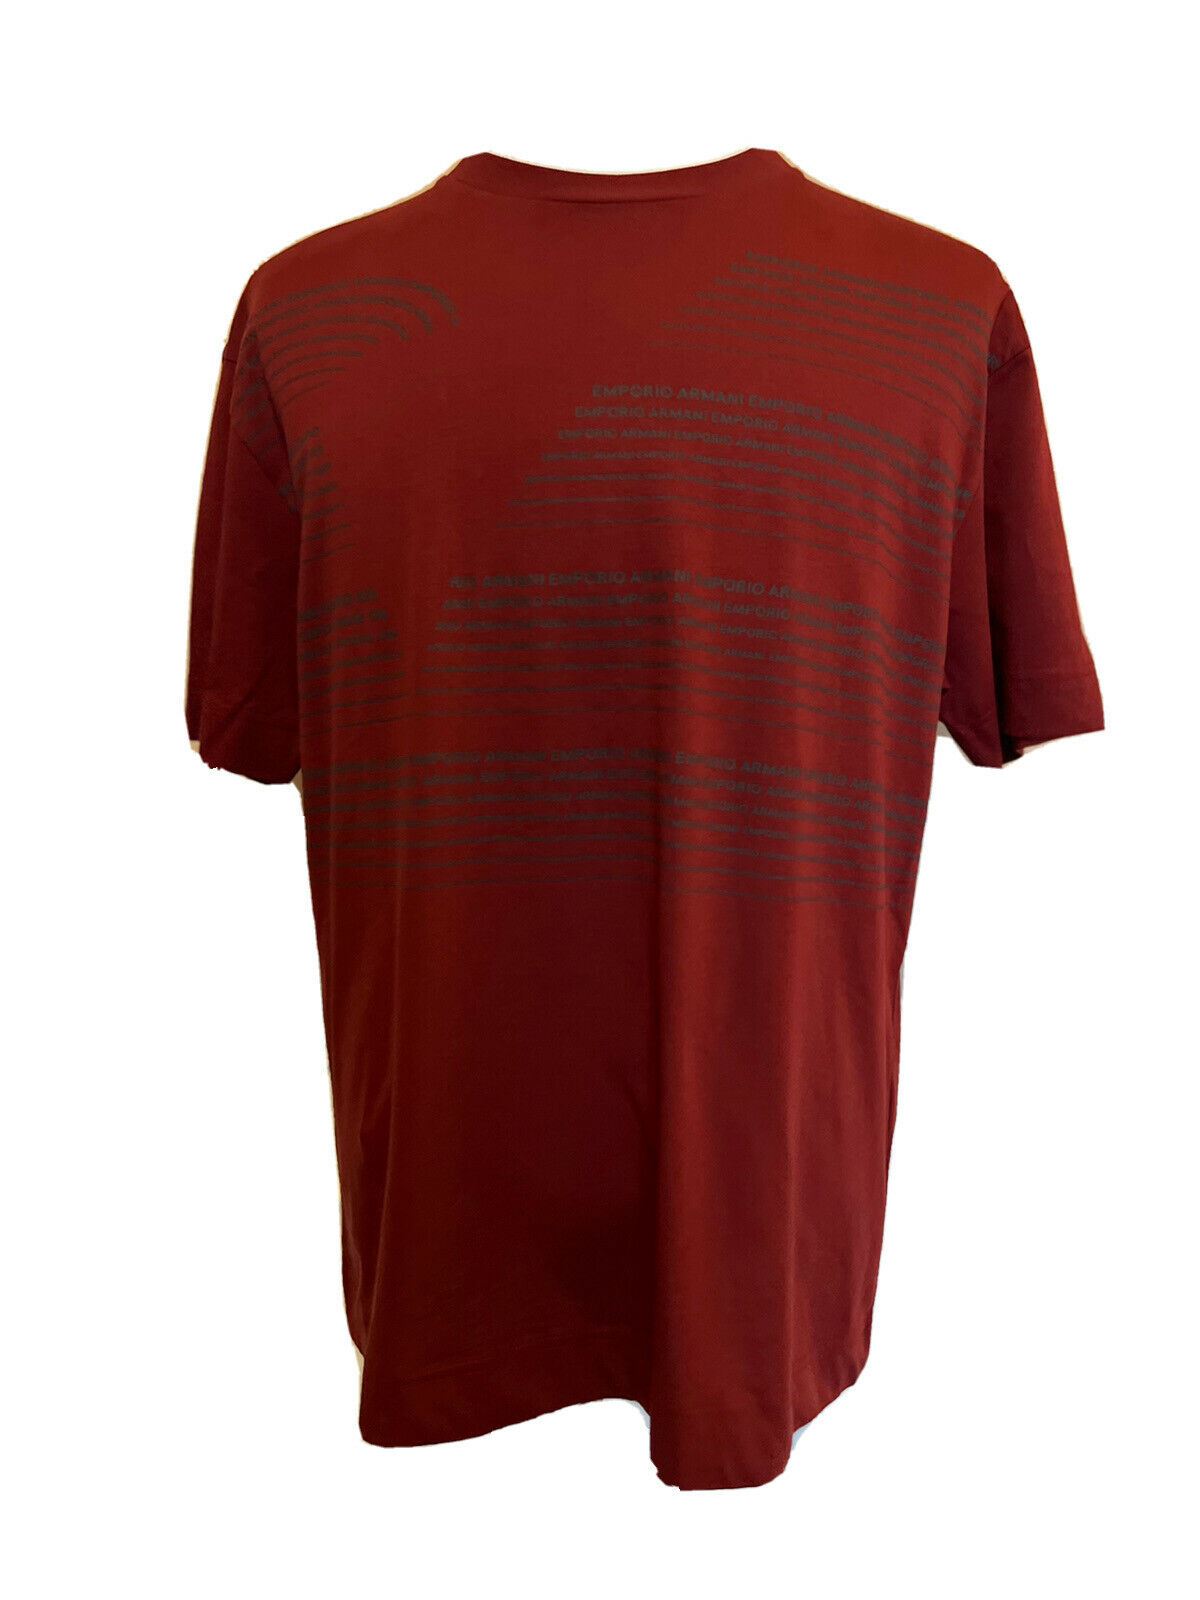 NWT $160 Emporio Armani Red Short Sleeve Graphic T-Shirt Large 6H1T97